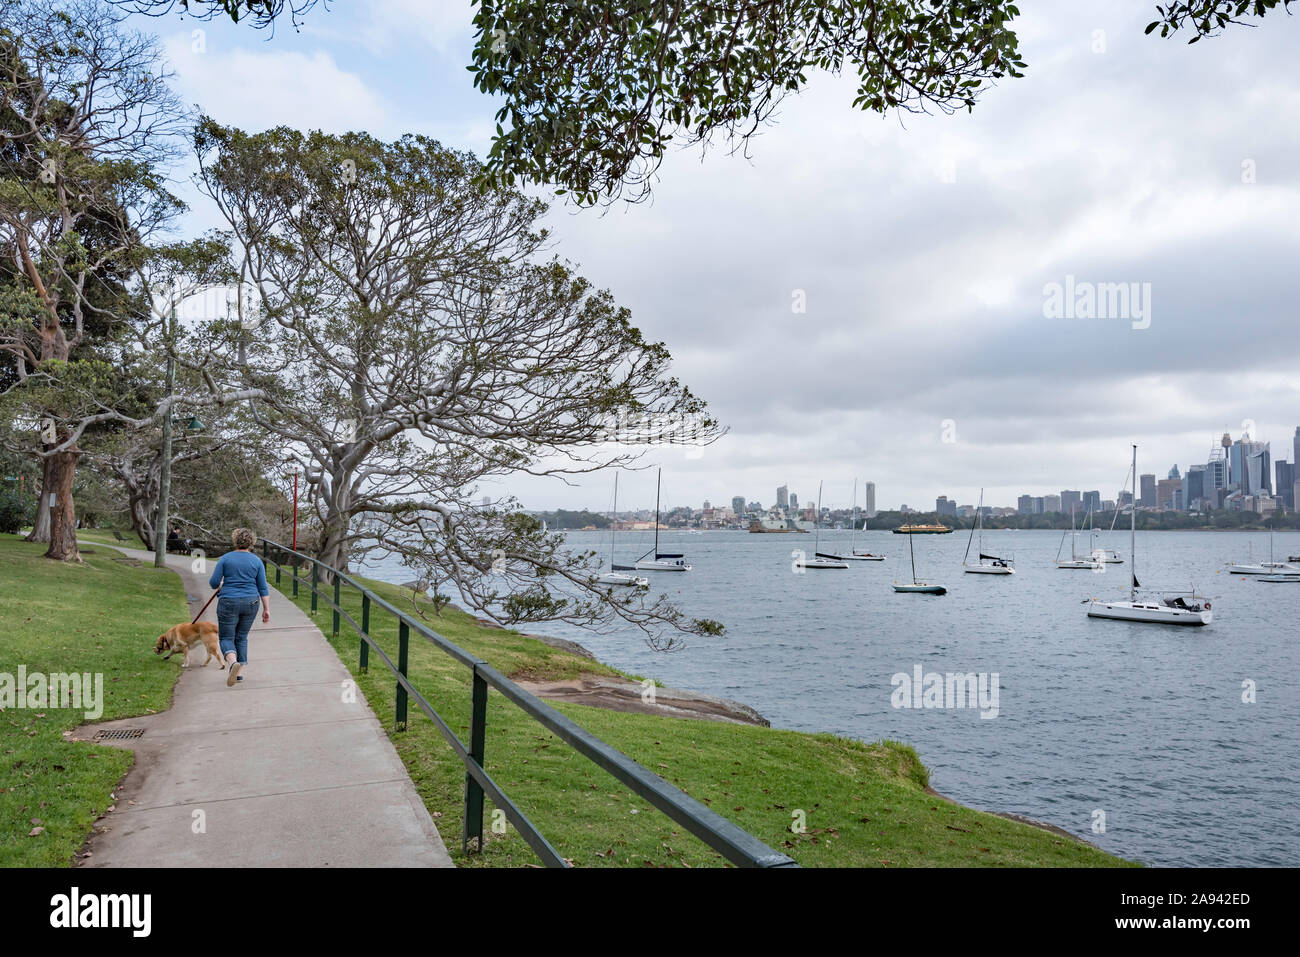 On a cloudy day in a woman walks briskly with her golden Labrador cross dog along a path through Cremorne Reserve beside Sydney Harbour in Australia Stock Photo